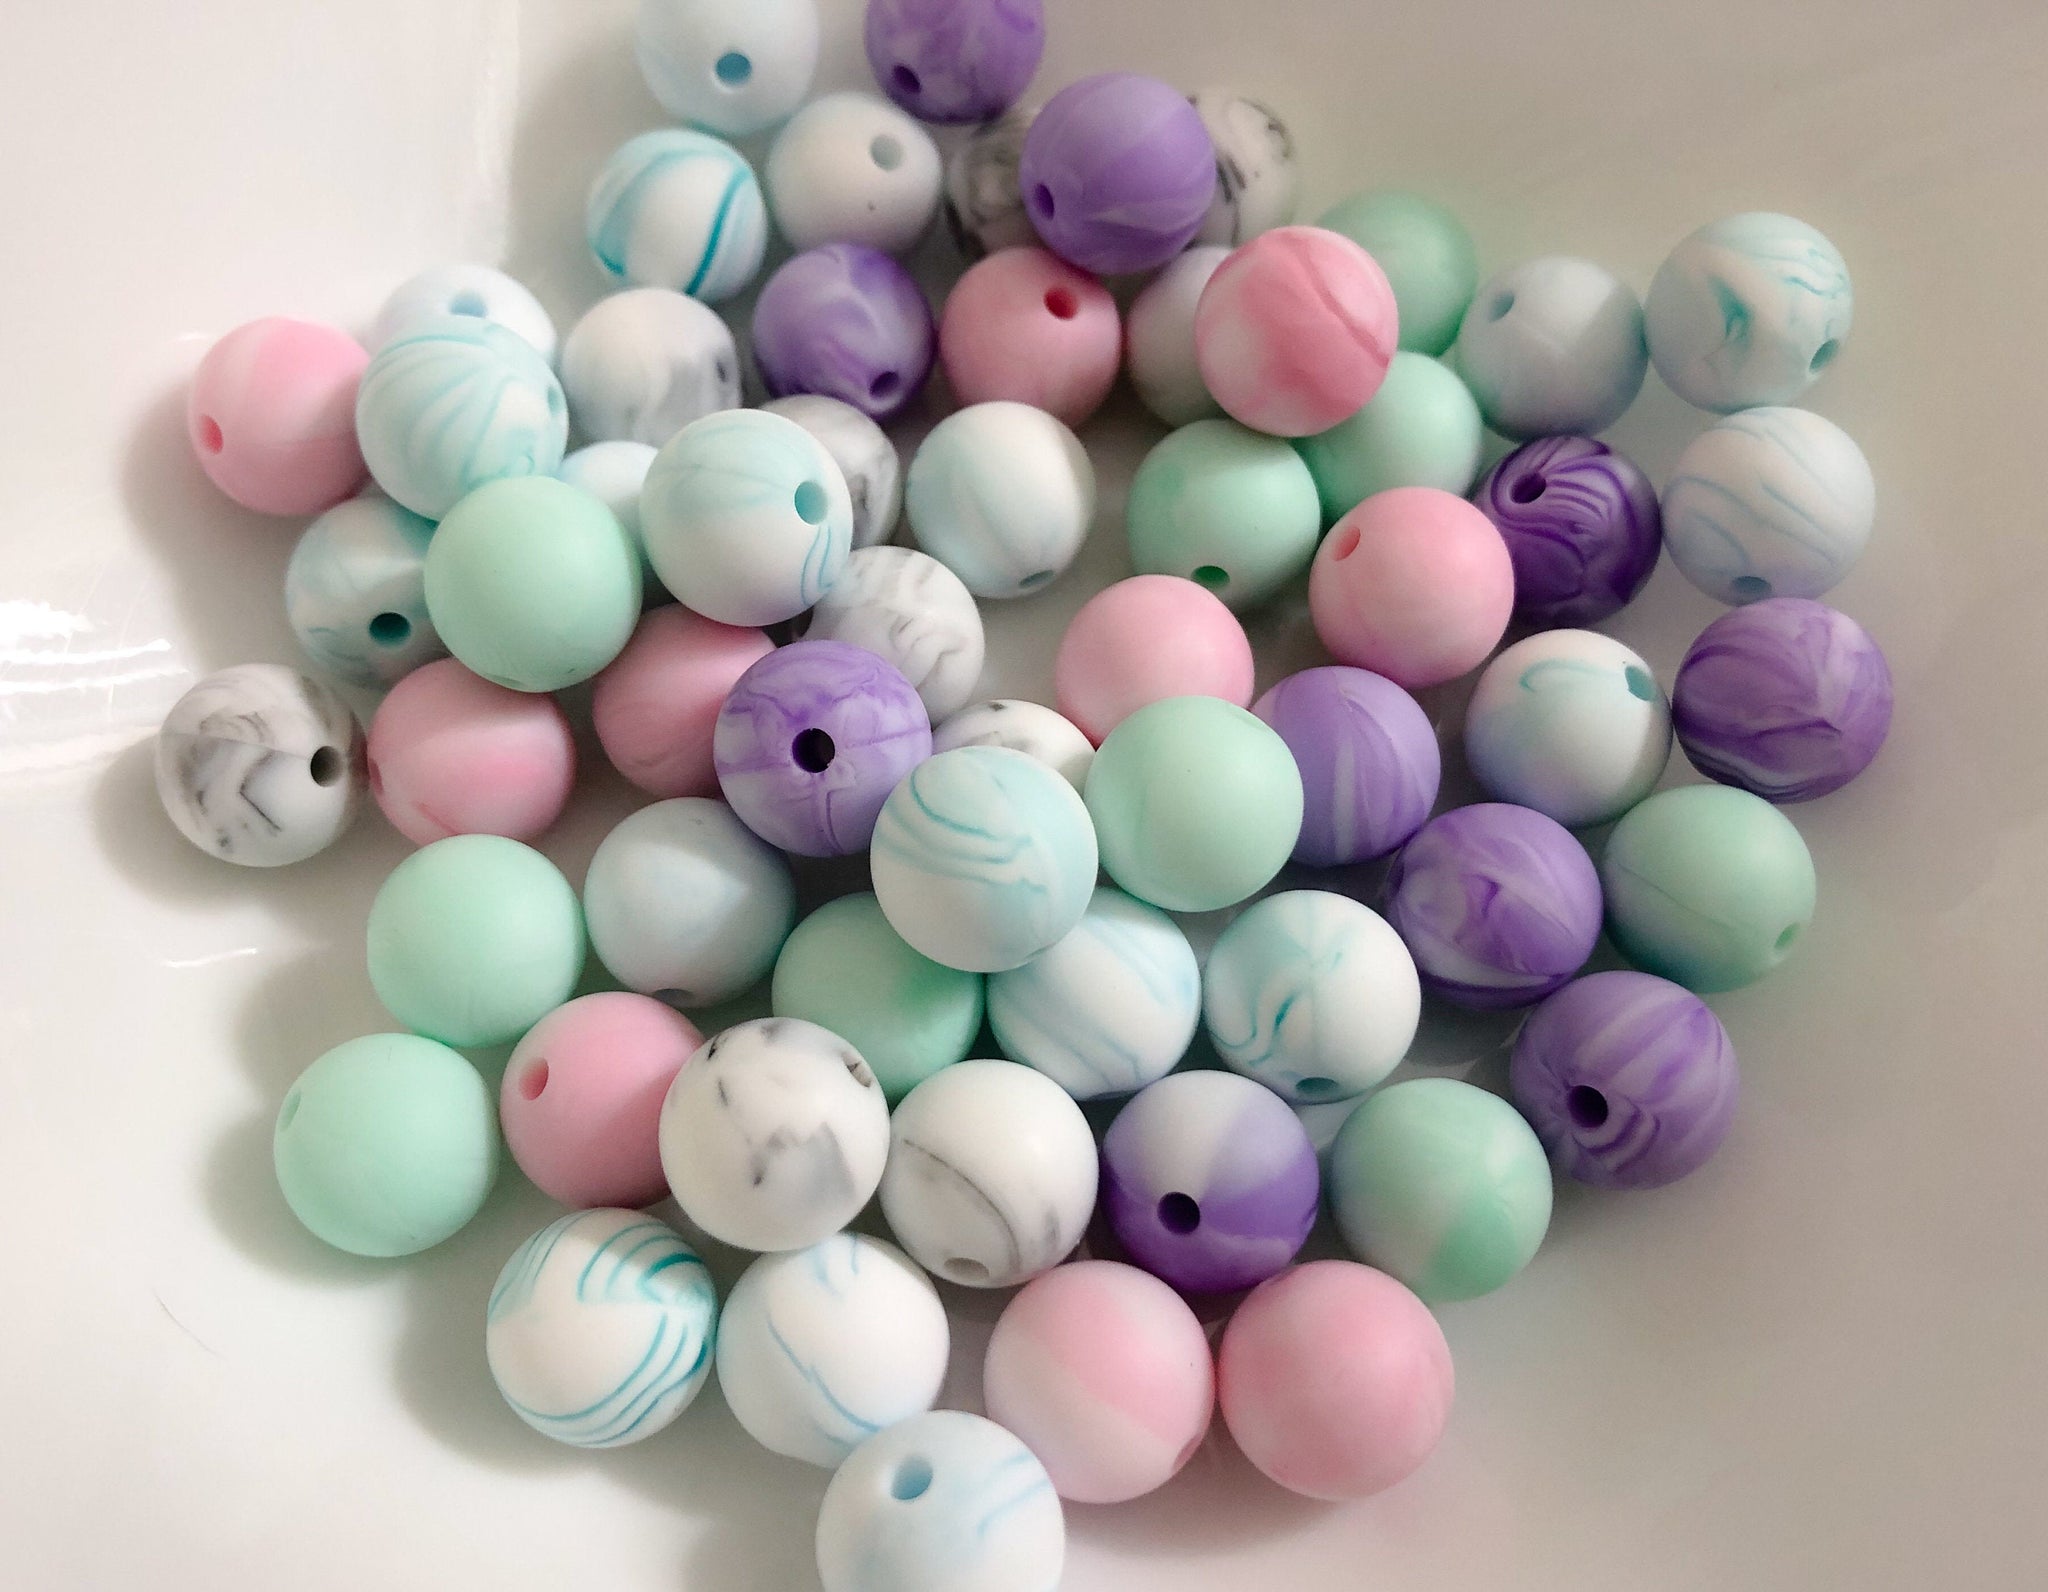 15mm Turquoise Silicone Beads, Silicone Beads in Bulk, 15mm Silicone  Bubblegum Beads, Chunky Beads 